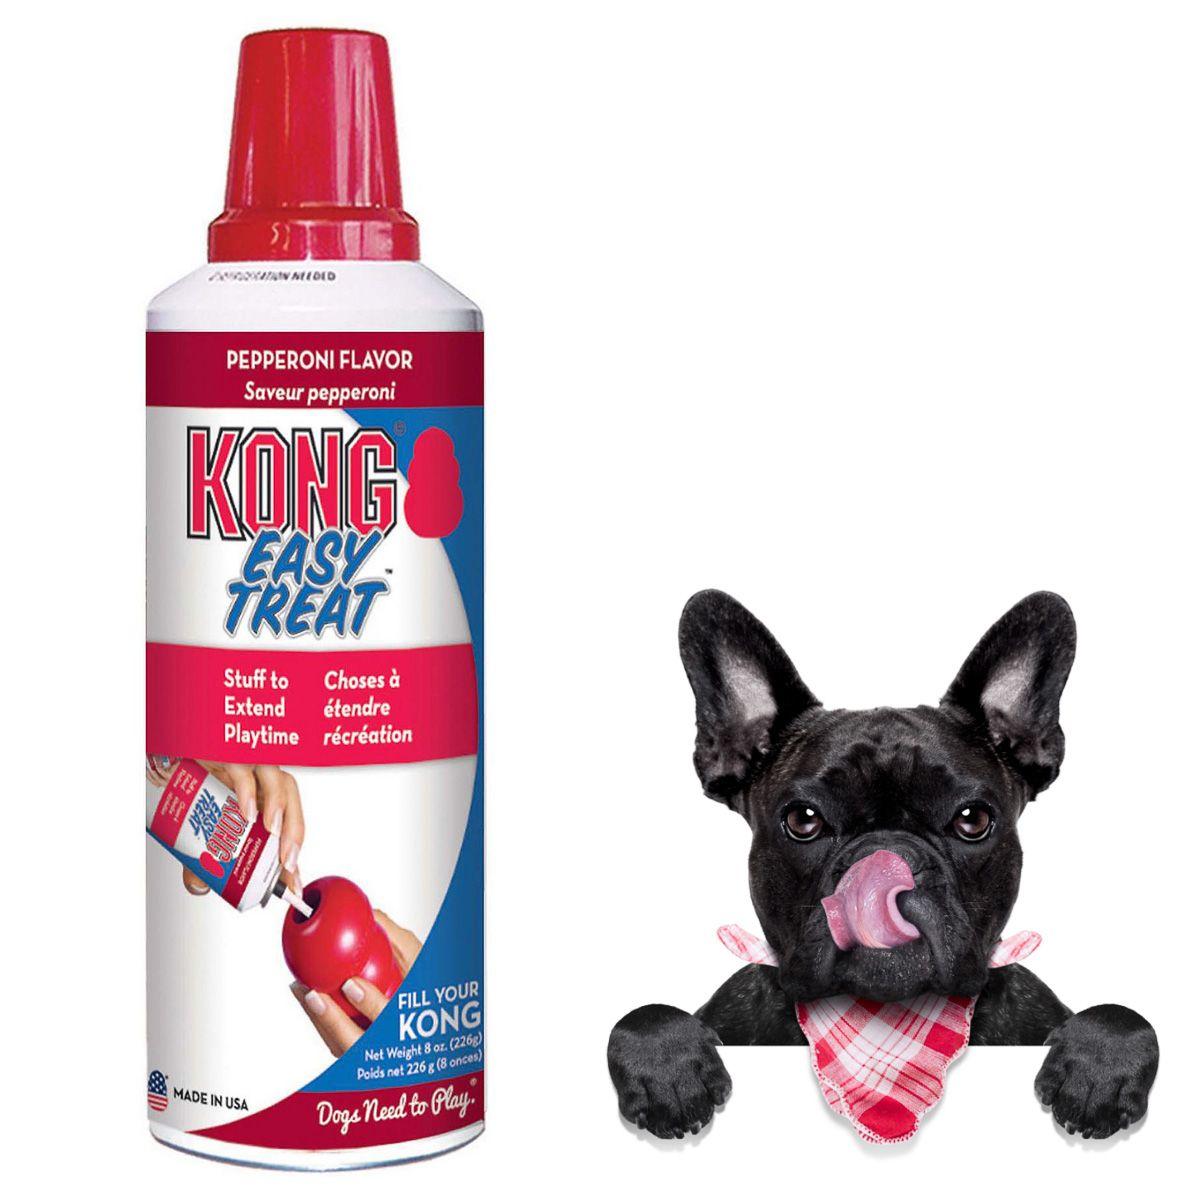 8oz Kong Easy Treat for Dogs for $16 Shipped